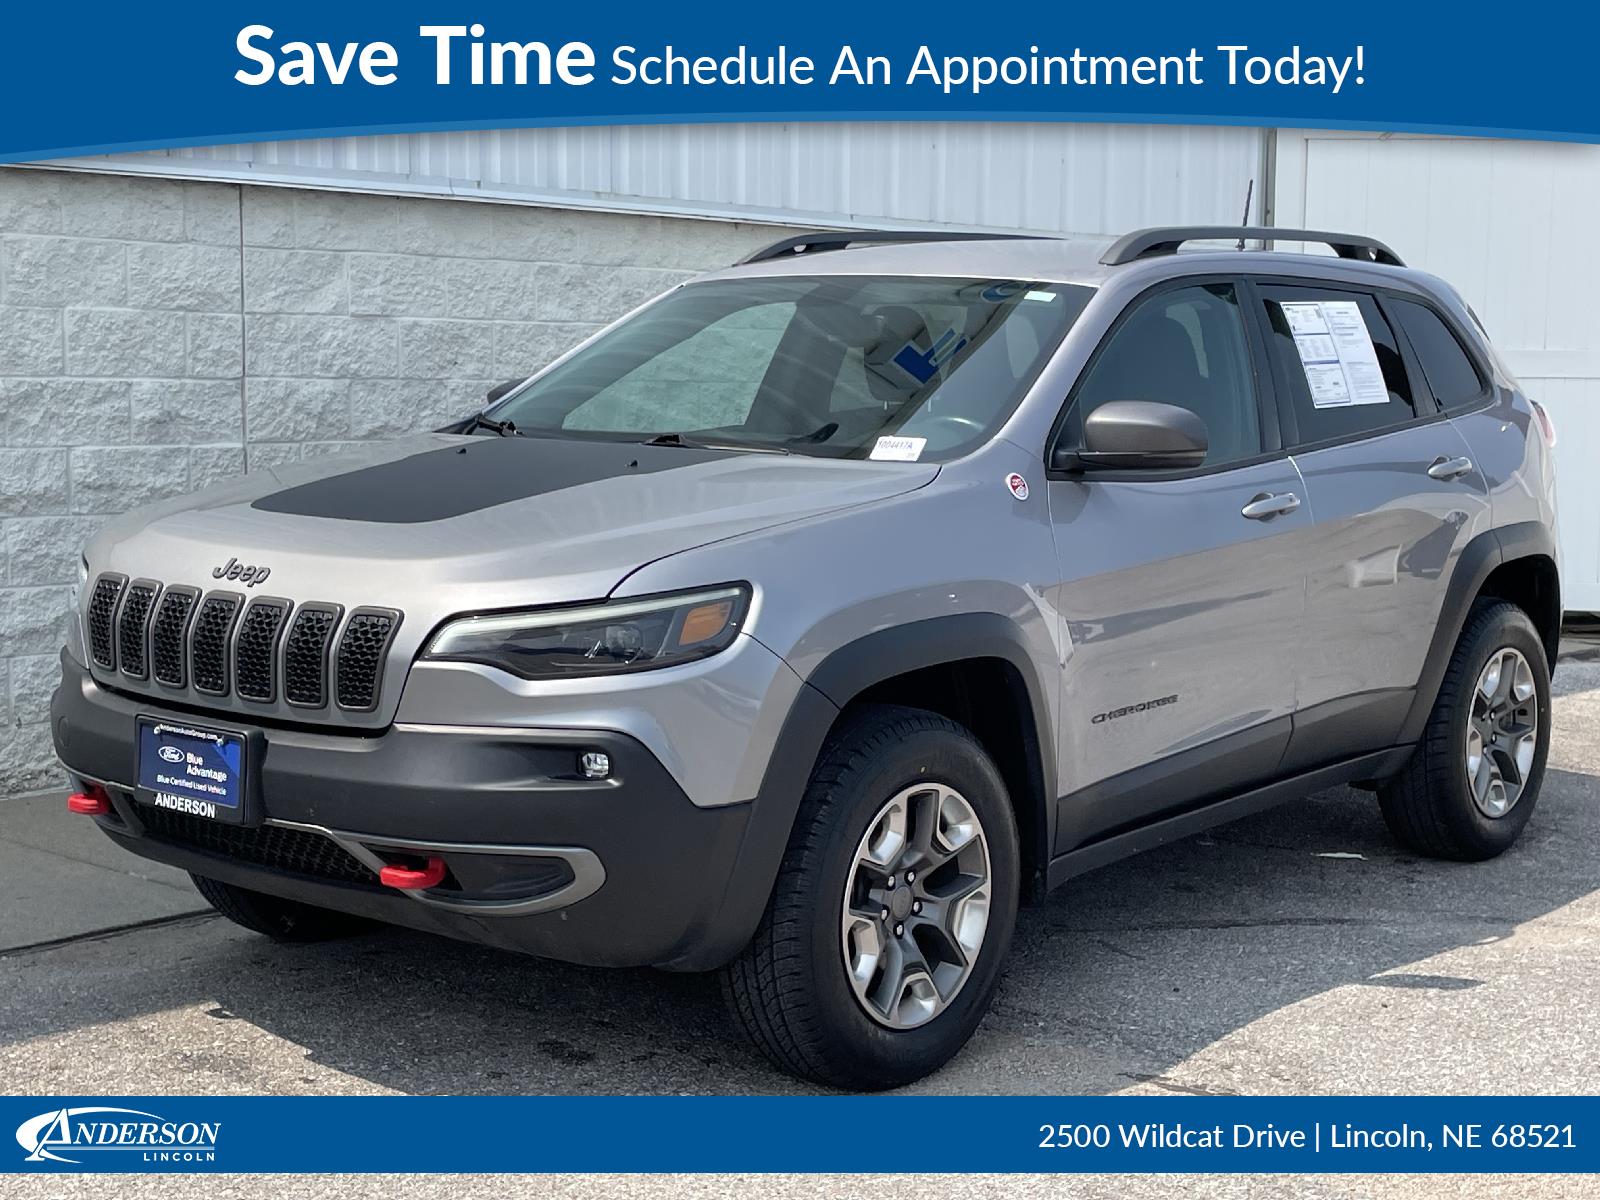 Used 2019 Jeep Cherokee Trailhawk Stock: 1004417a